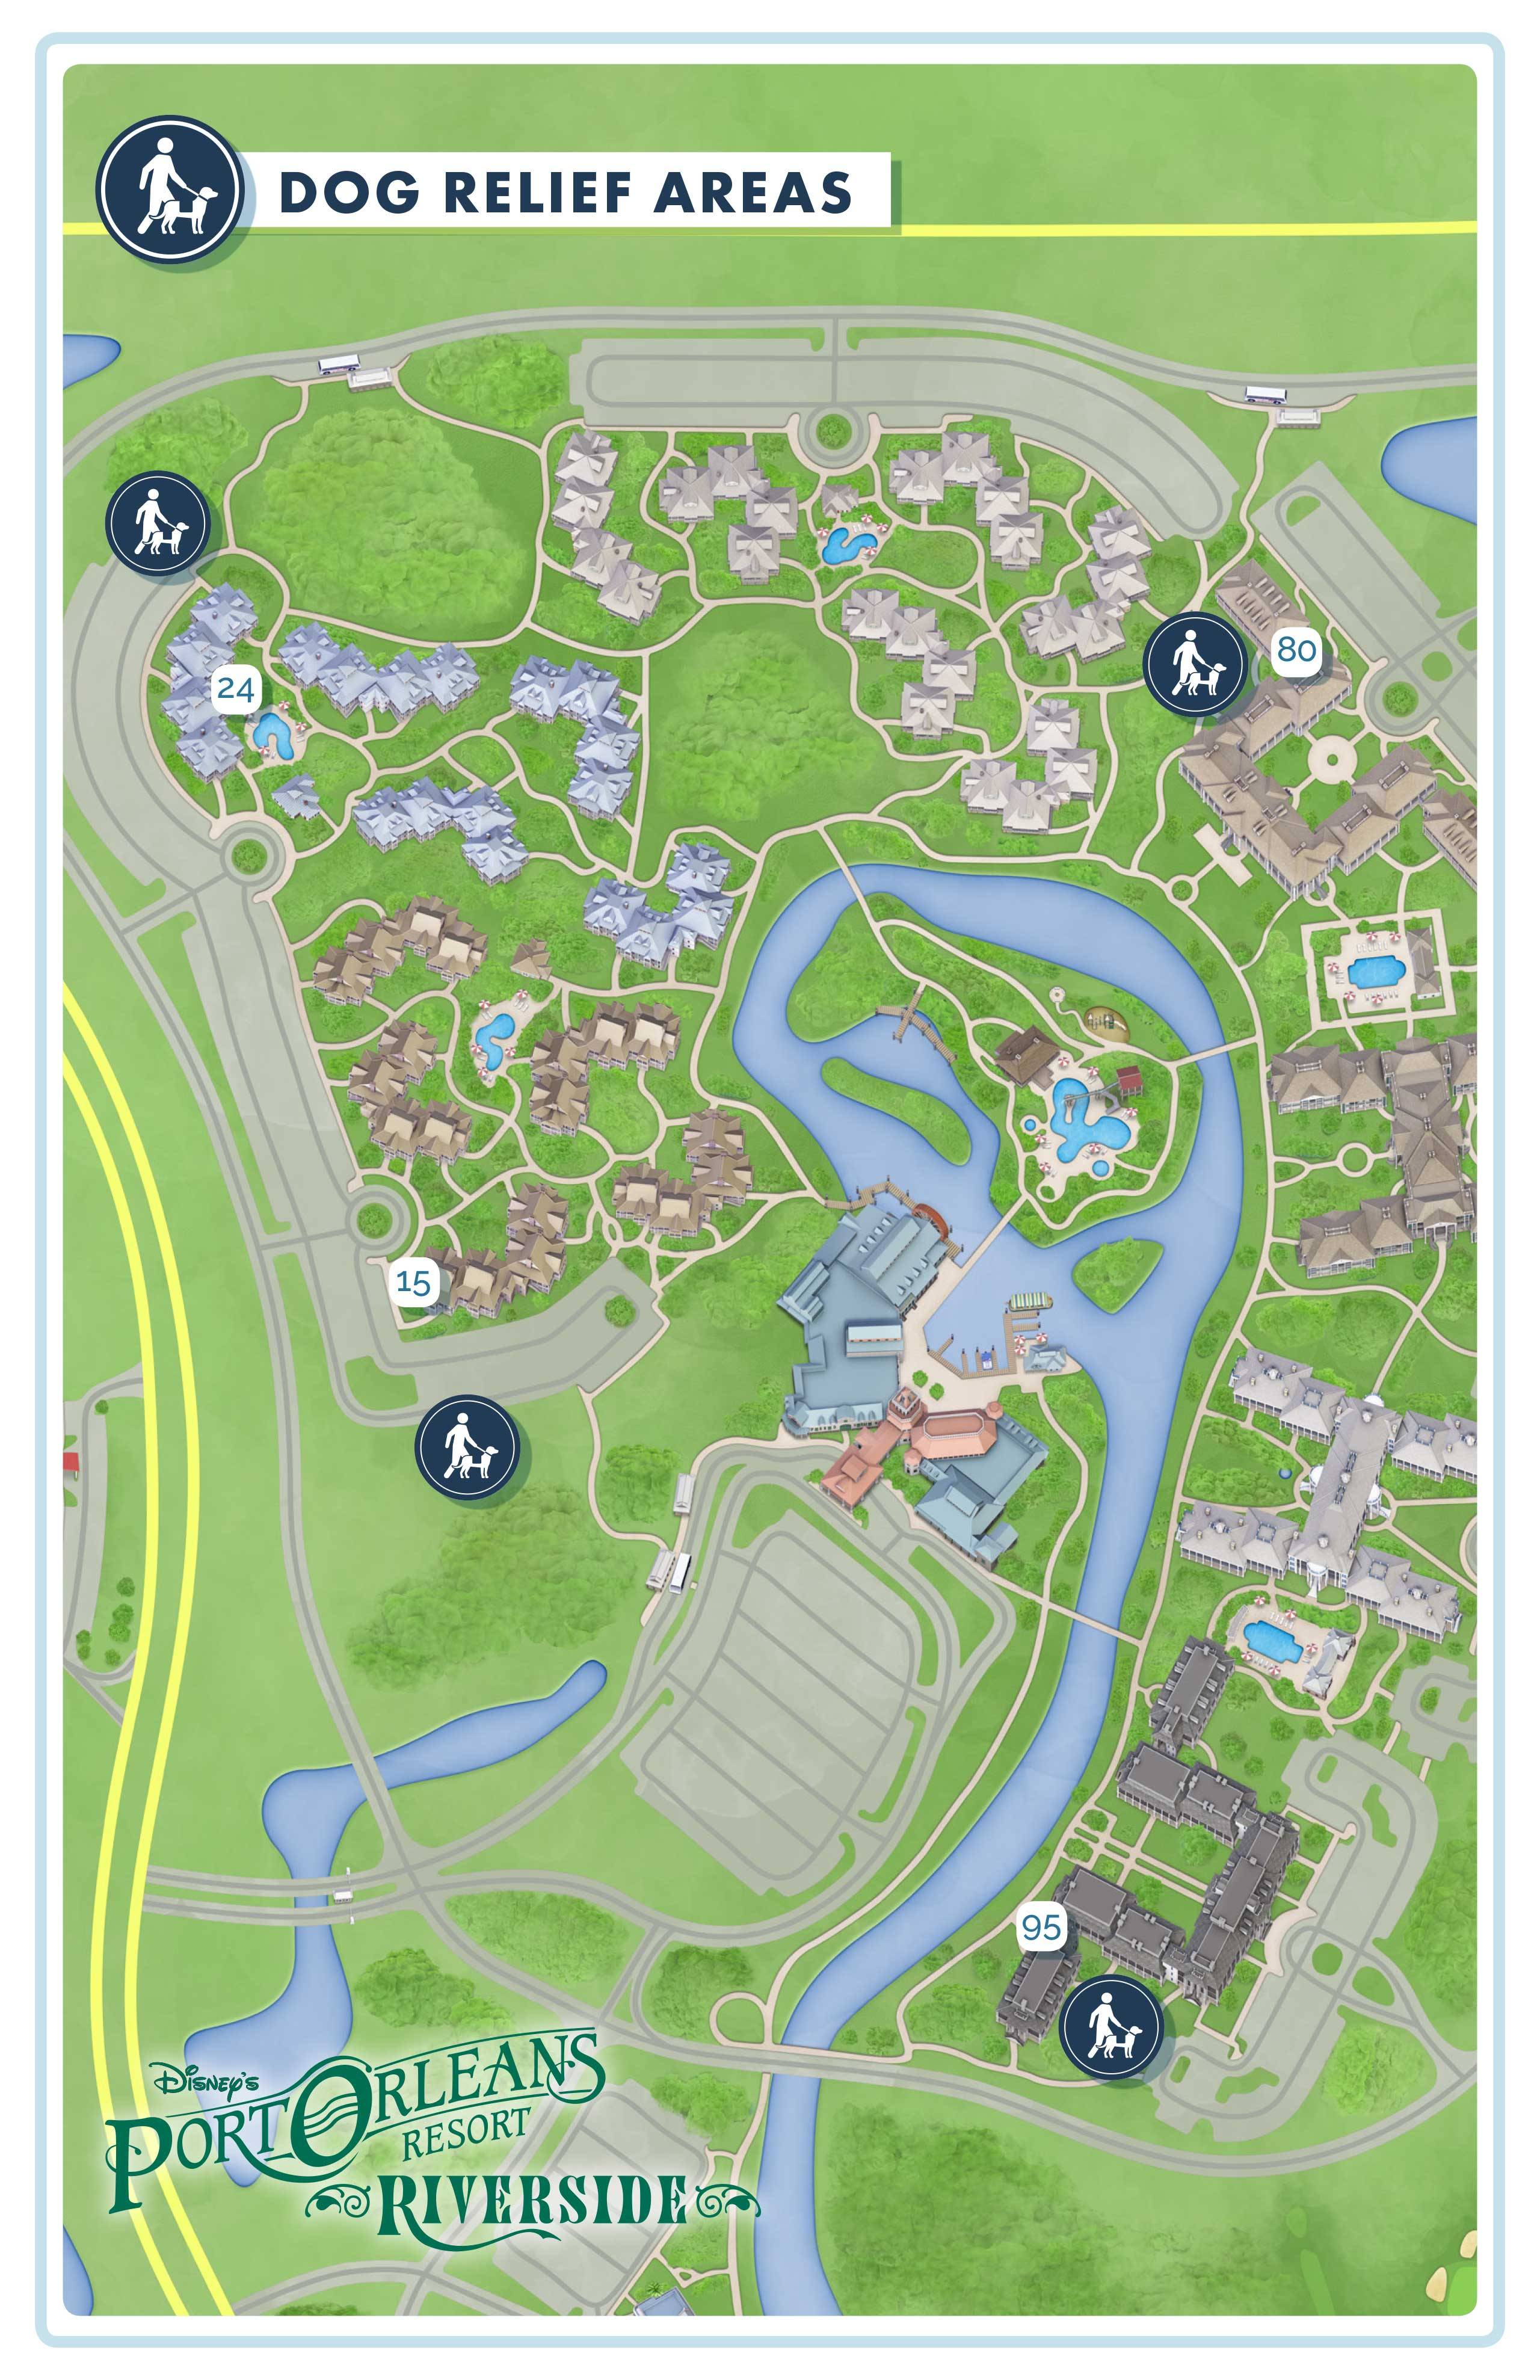 Dog Policies and Dog Relief Areas at Walt Disney World Resort hotels